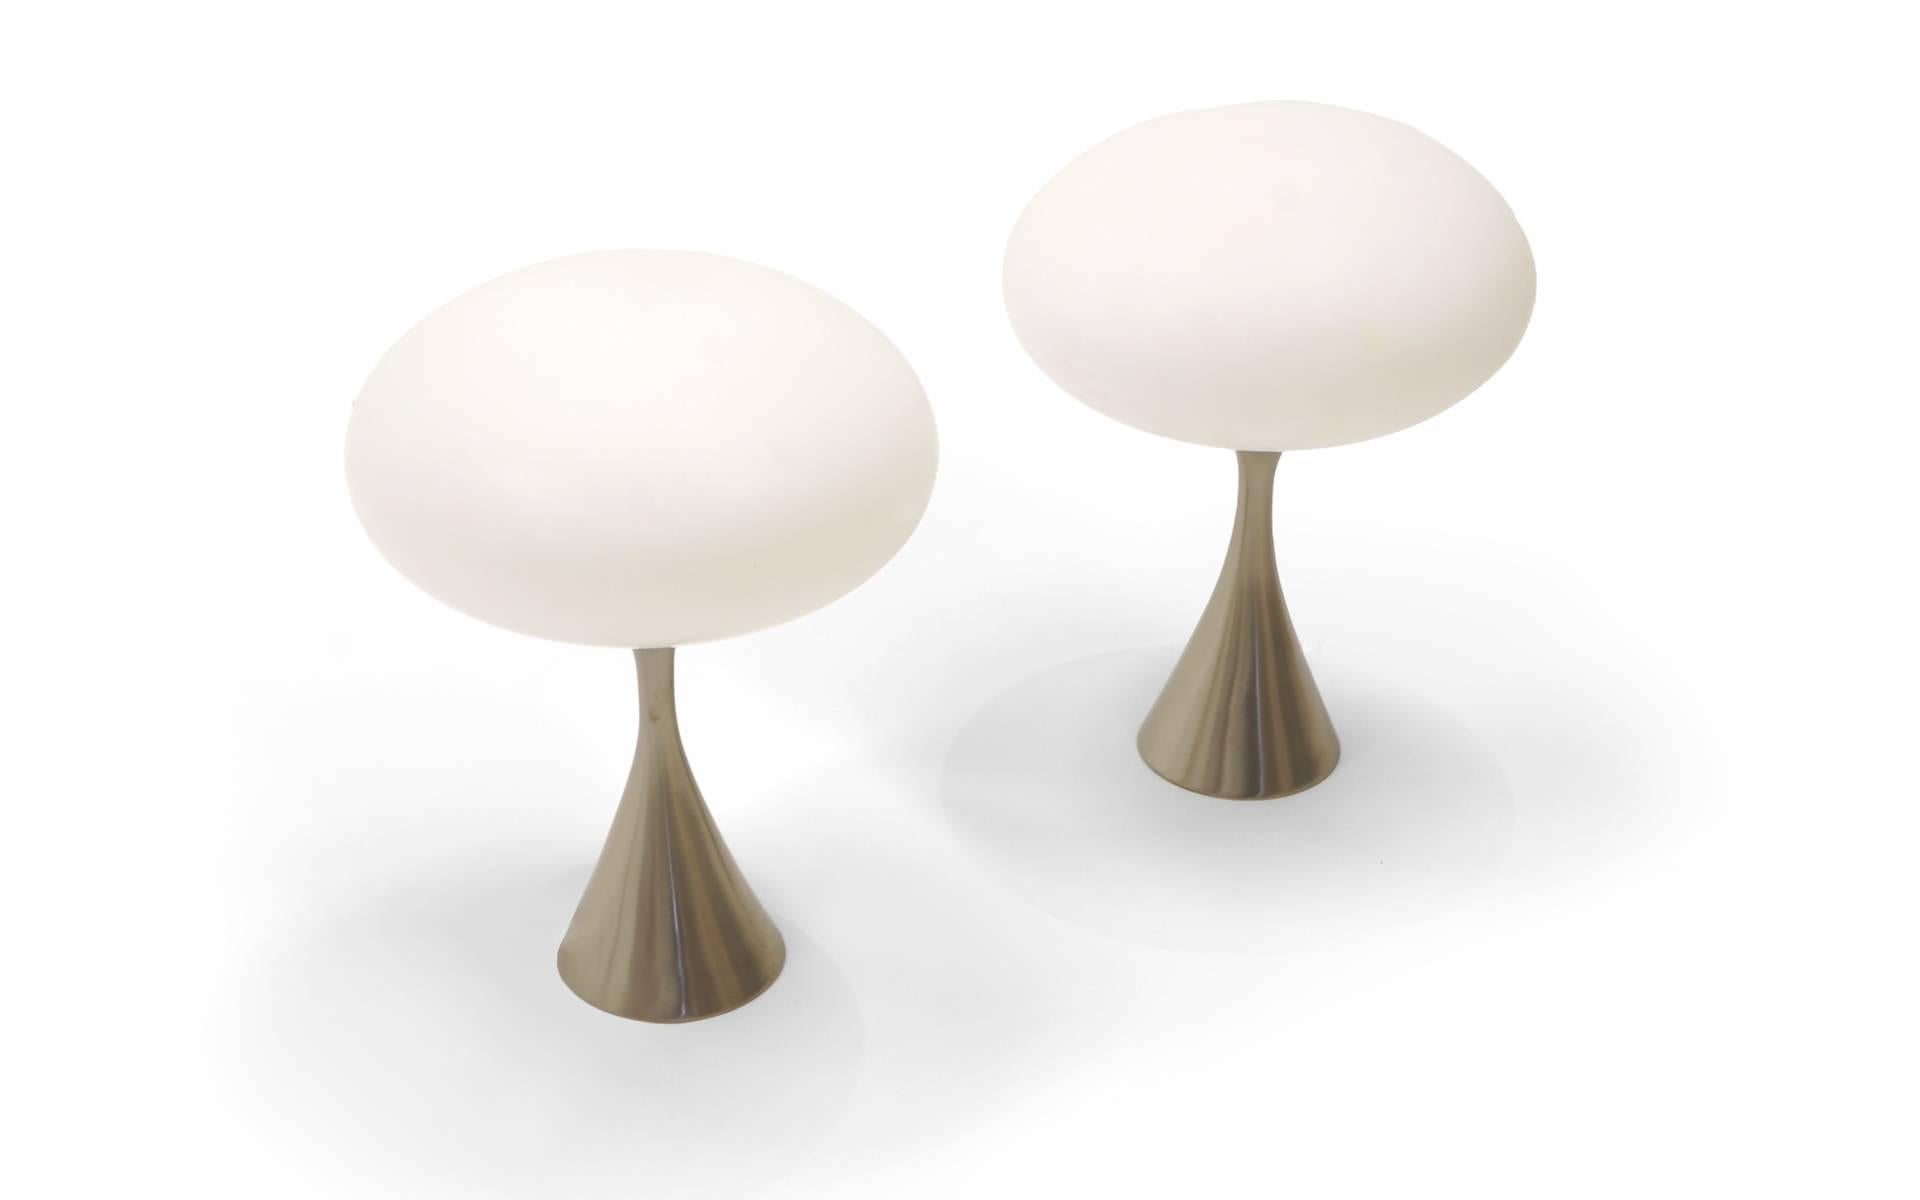 Pair of Laurel mod table lamps with original shades. Satin chrome tulip bases.
Base diameter is 5 inches.